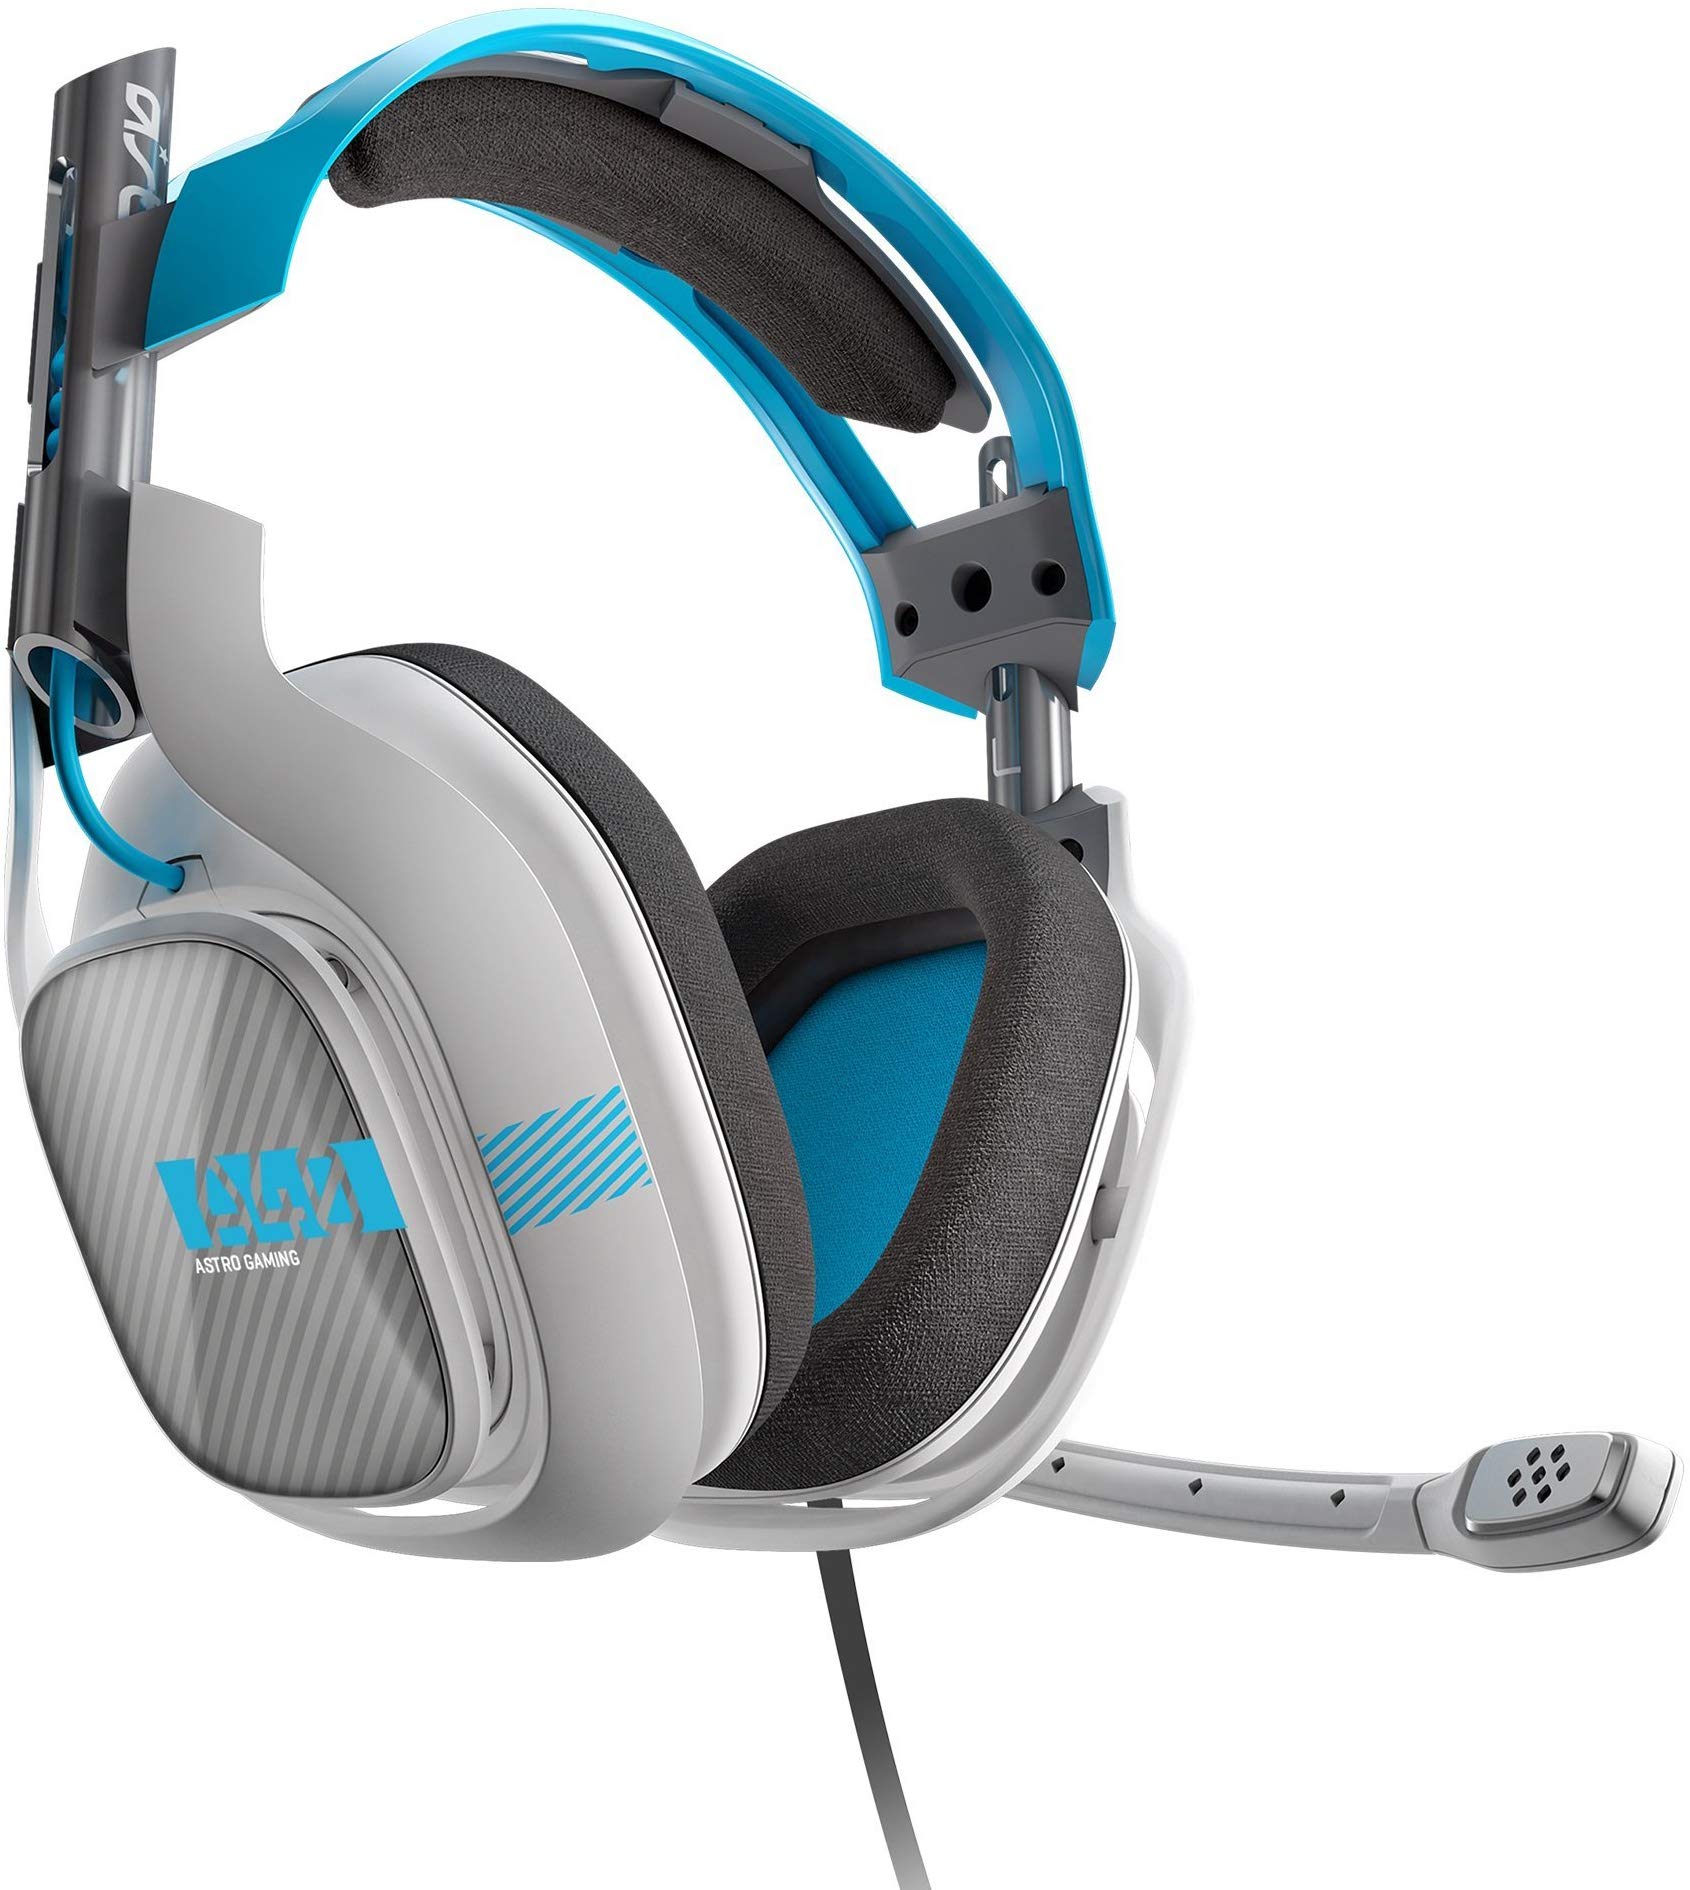 ASTRO Gaming A40 Headset + Mixamp M80 - Light Grey/Blue - Xbox One (2014 model) (Certified Refurbished)